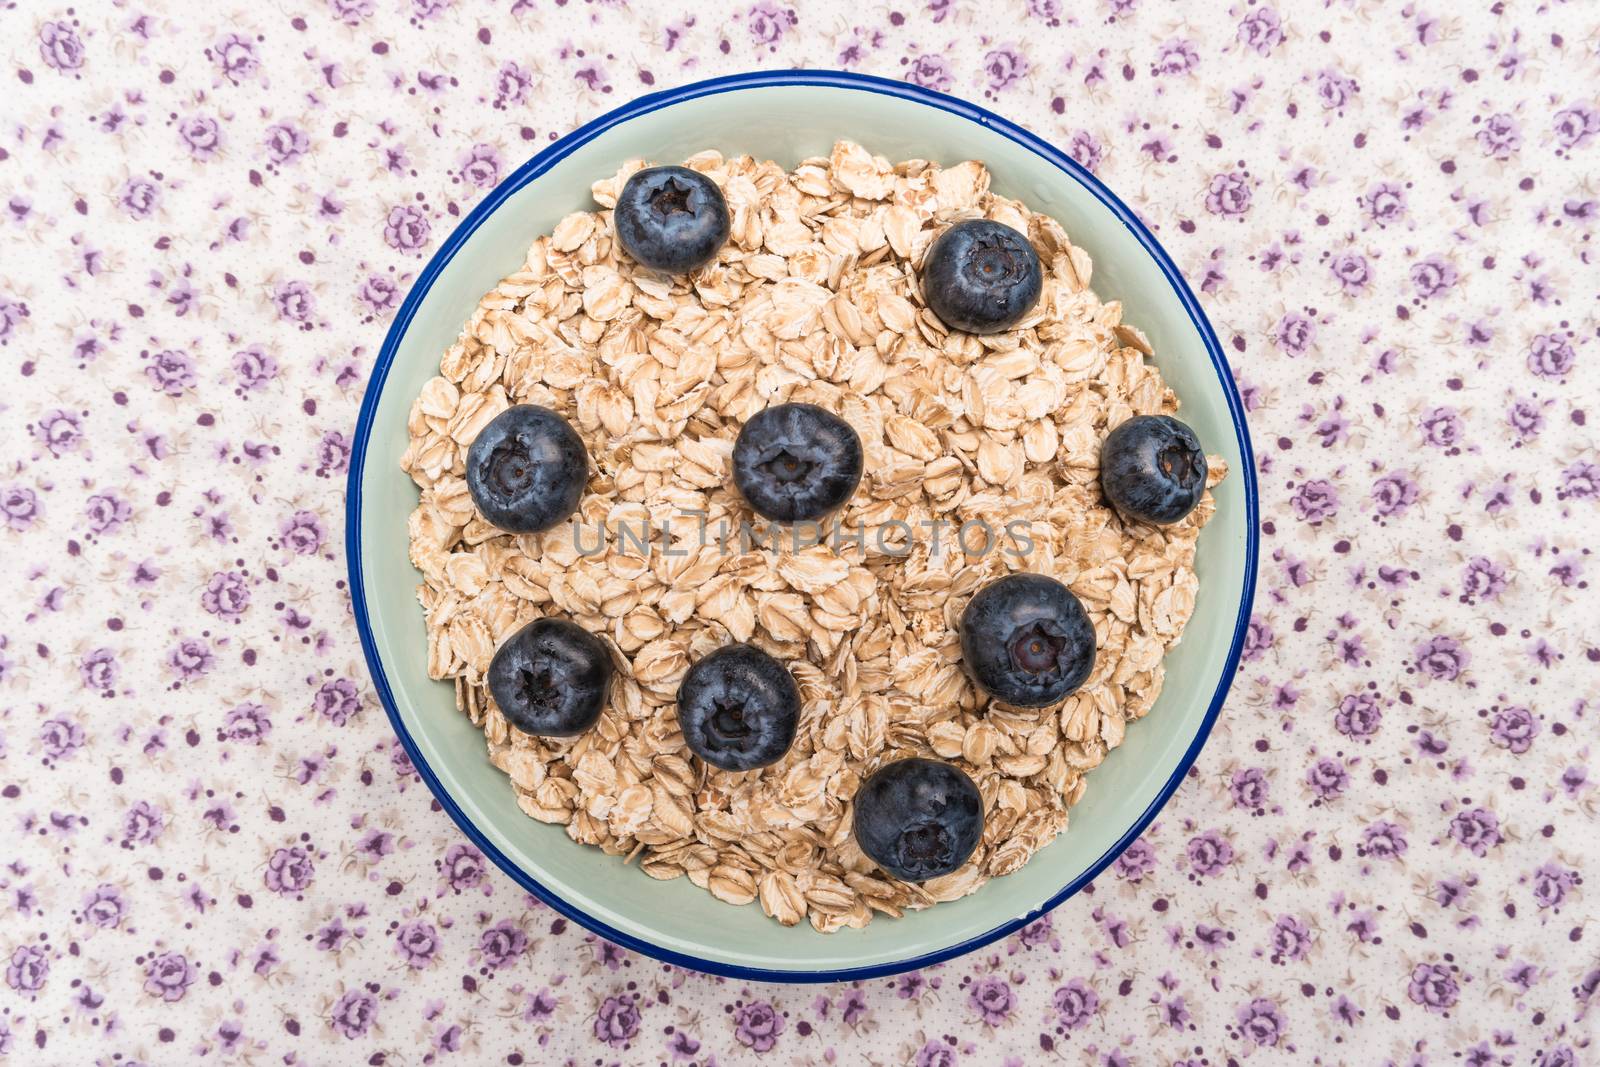 Oat flakes with blueberries in a bowl on cute fabric background. Top view with copy space.